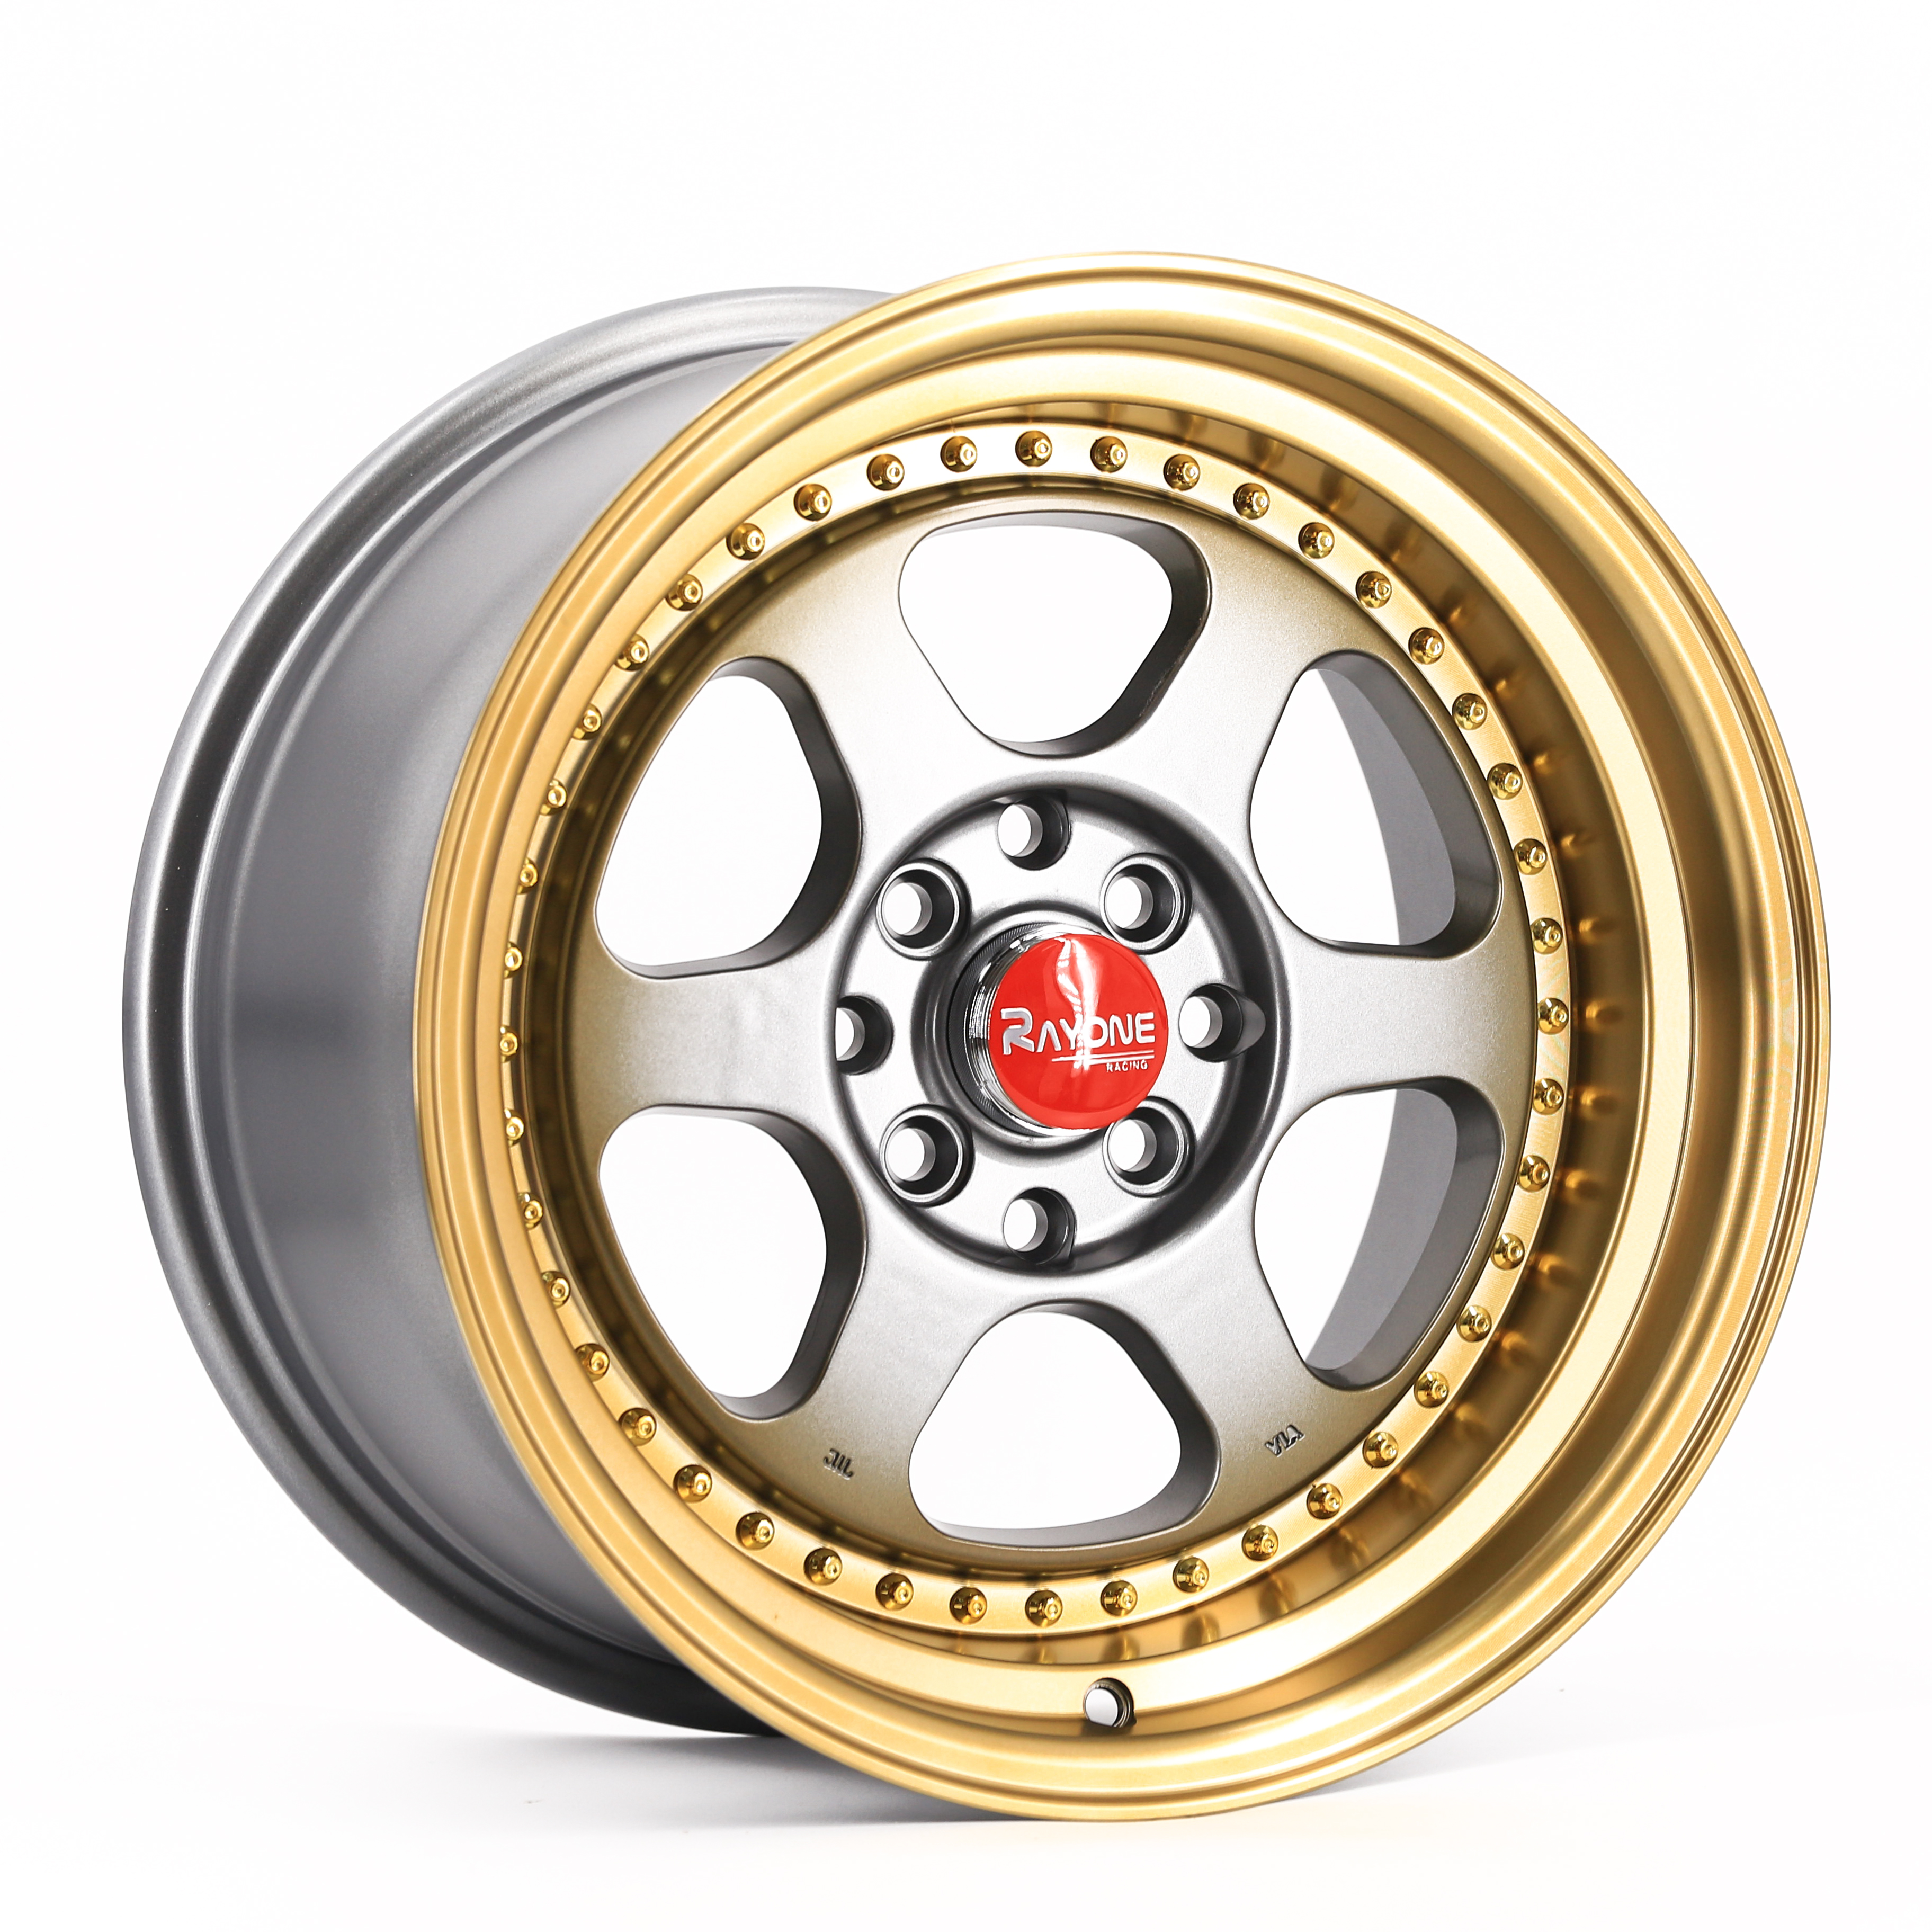 Factory Price For Alloy Wheels For Ambassador Car - Gold Color Deep Dish Rivets 4 Hole Rims 15 Inch Alloy Wheels For Racing Car – Rayone